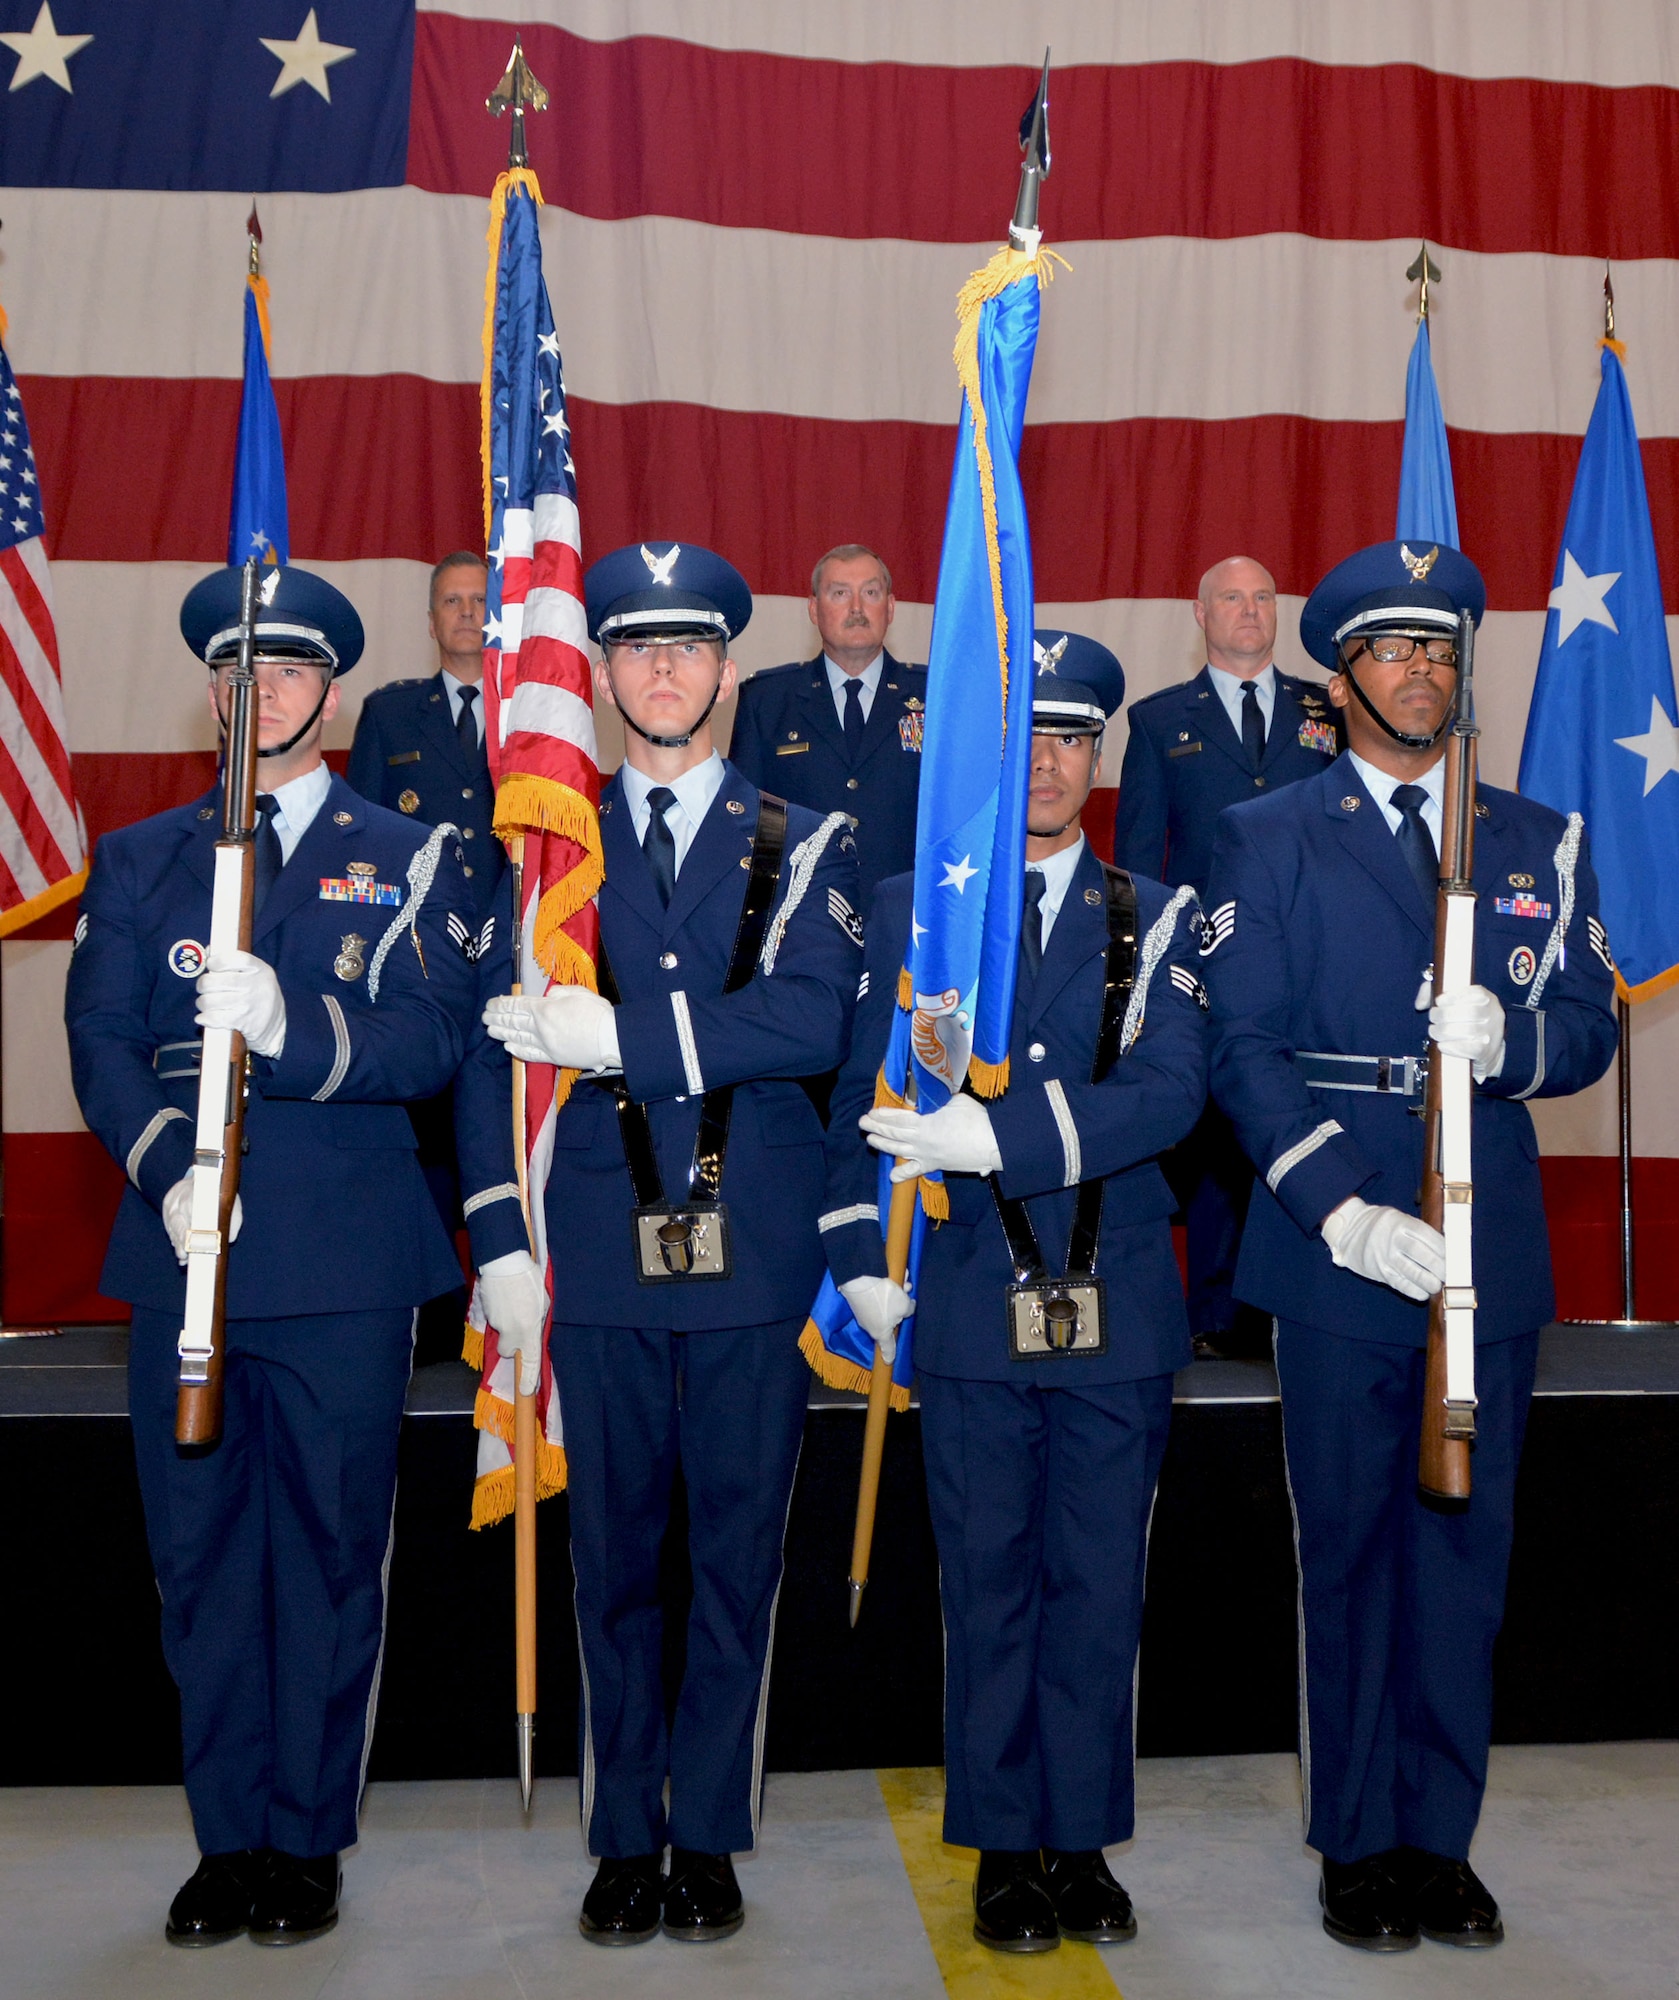 The 72nd Air Base Wing Honor Guard presents the colors during the 507th Air Refueling Wing change of command ceremony June 3, 2018, at Tinker Air Force Base, Okla. Maj. Gen. Randall Ogden, Fourth Air Force commander, gave command of the 507th ARW to Col. Richard Heaslip. (U.S. Air Force photo/Tech. Sgt. Samantha Mathison)